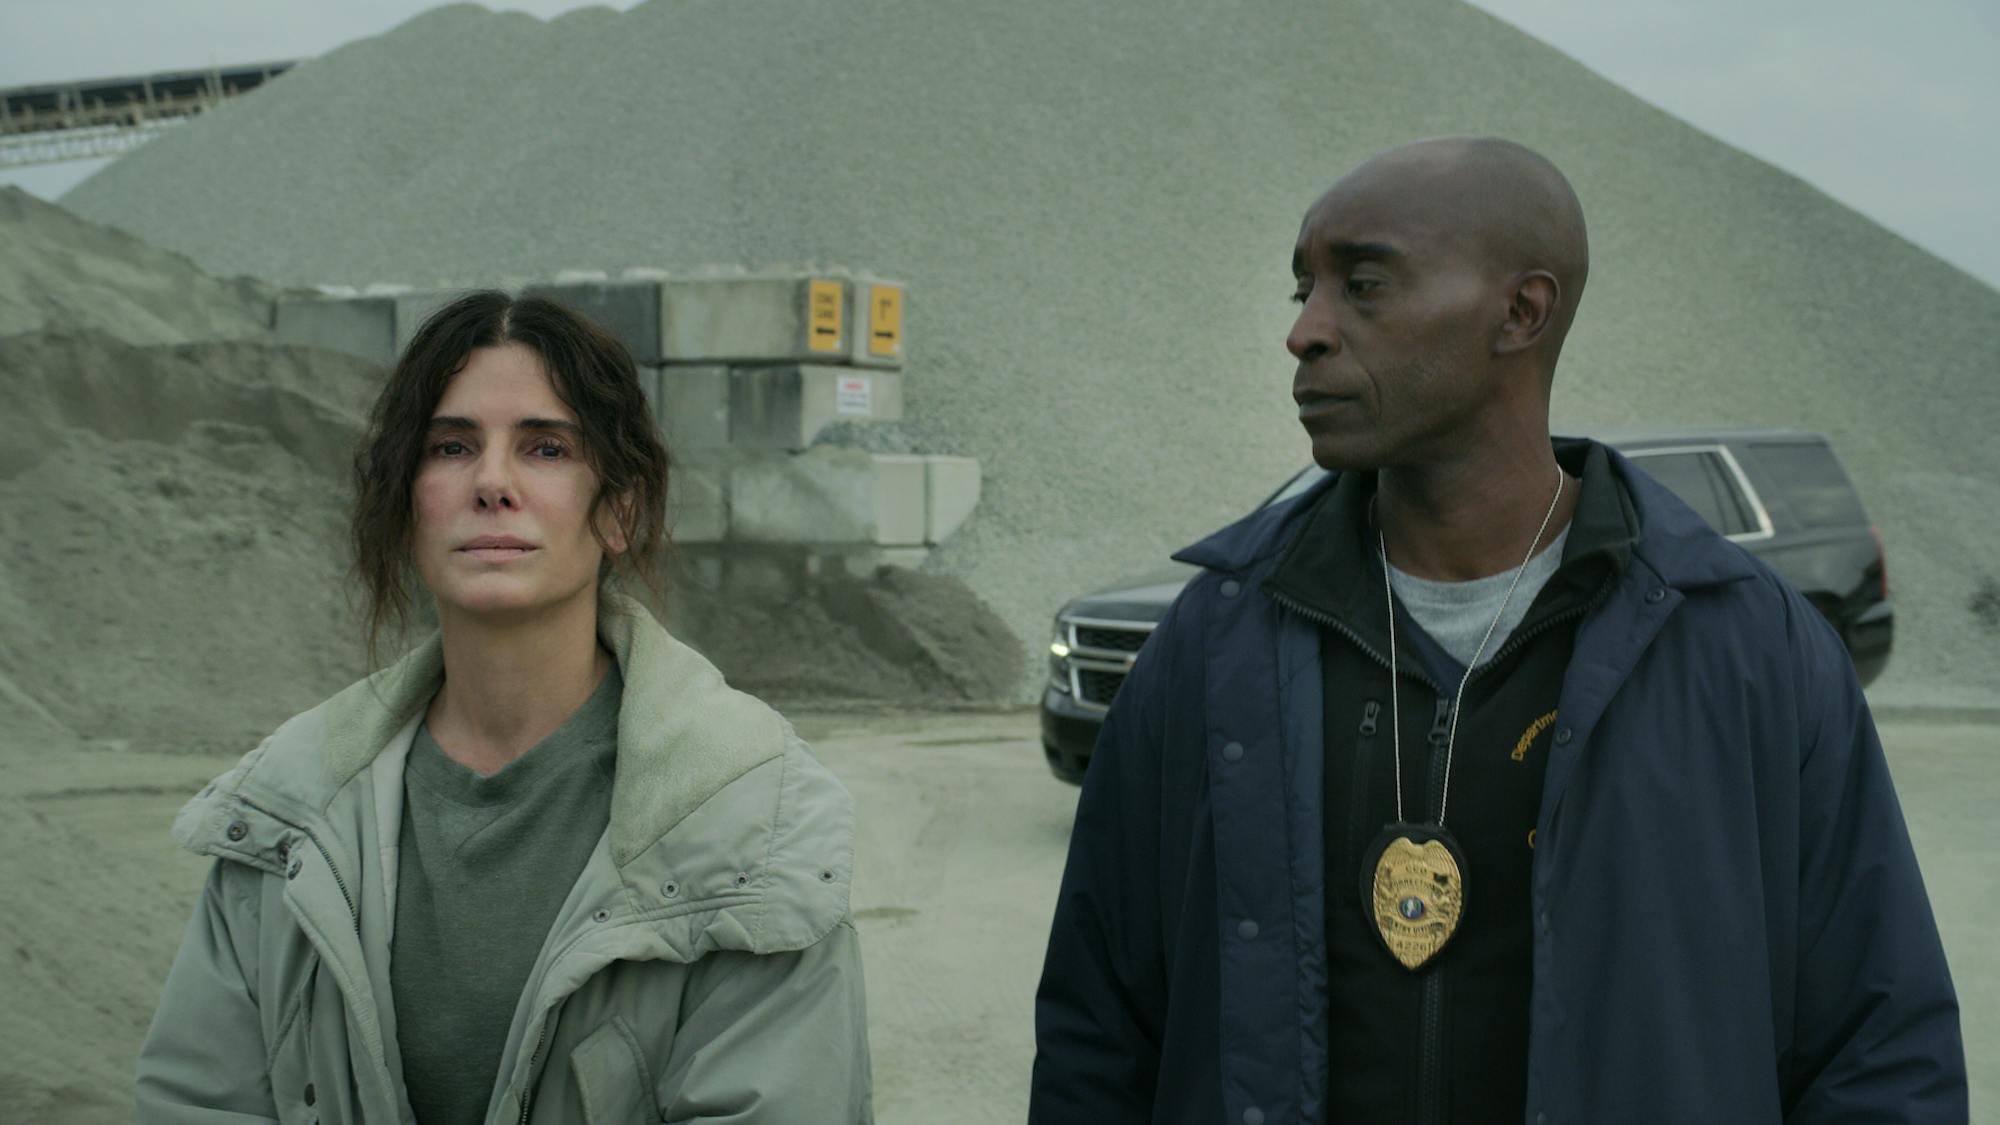 Ruth Slater (Sandra Bullock) and Vincent Cross (Rob Morgan) stand in a dusty lot. Vincent wears a navy jacket with a police badge, and Ruth wears an olive green shirt and light green jacket. 